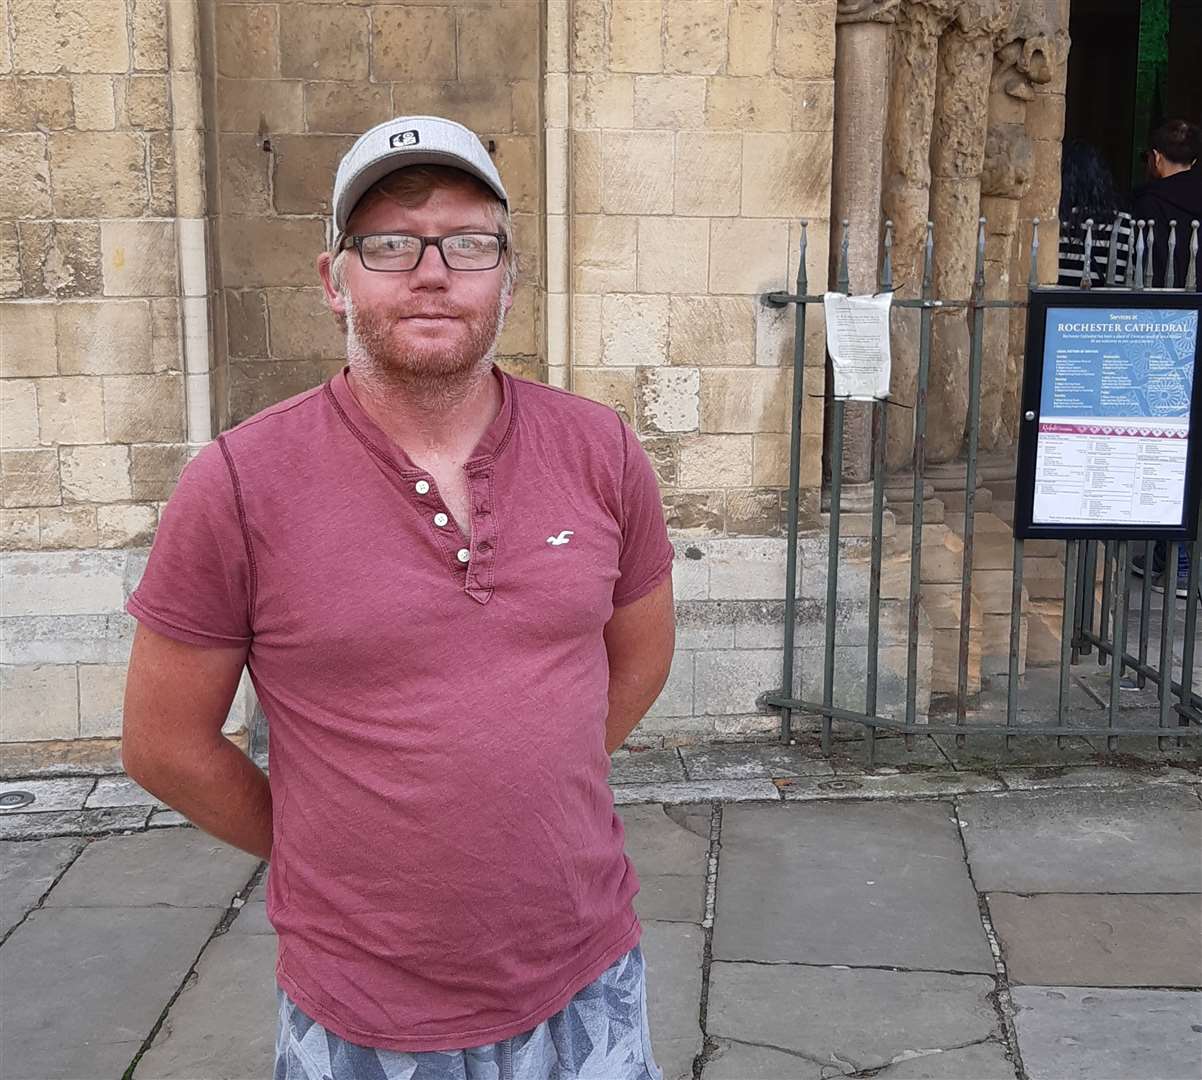 Outside Rochester Cathedral, Warren Todd, from Borstal said the Queen had played a positive role representing the UK on the world stage. Photo: Sean Delaney